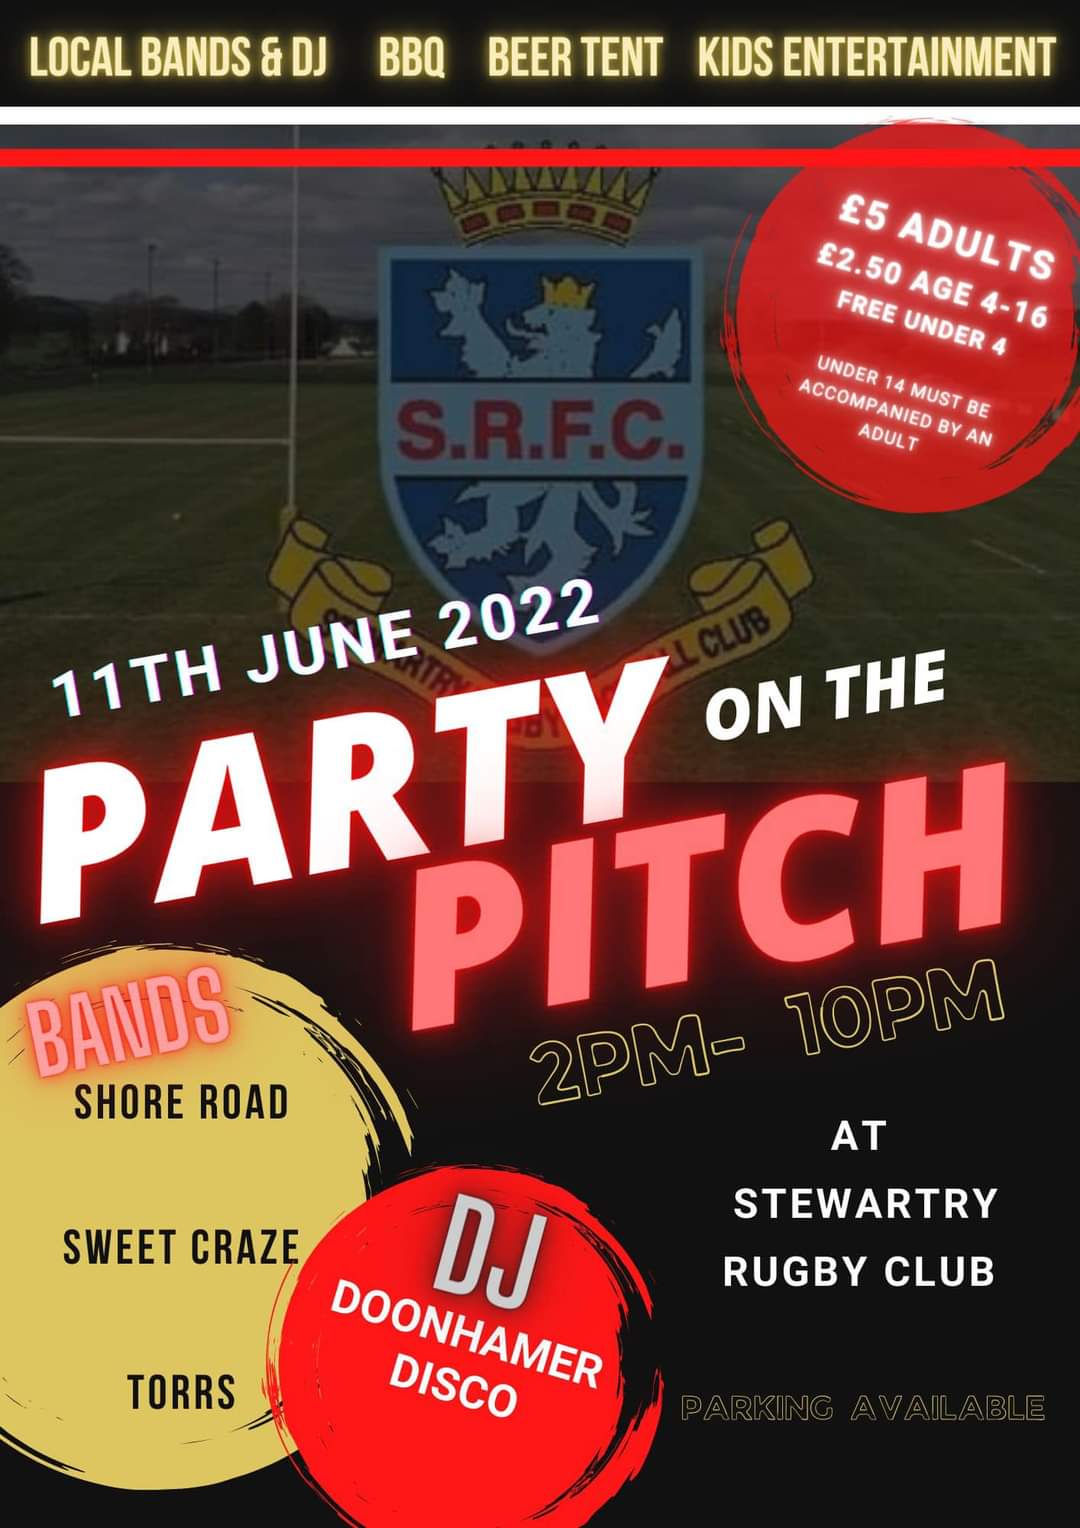 Party on the Pitch Stewartry Rugby Club